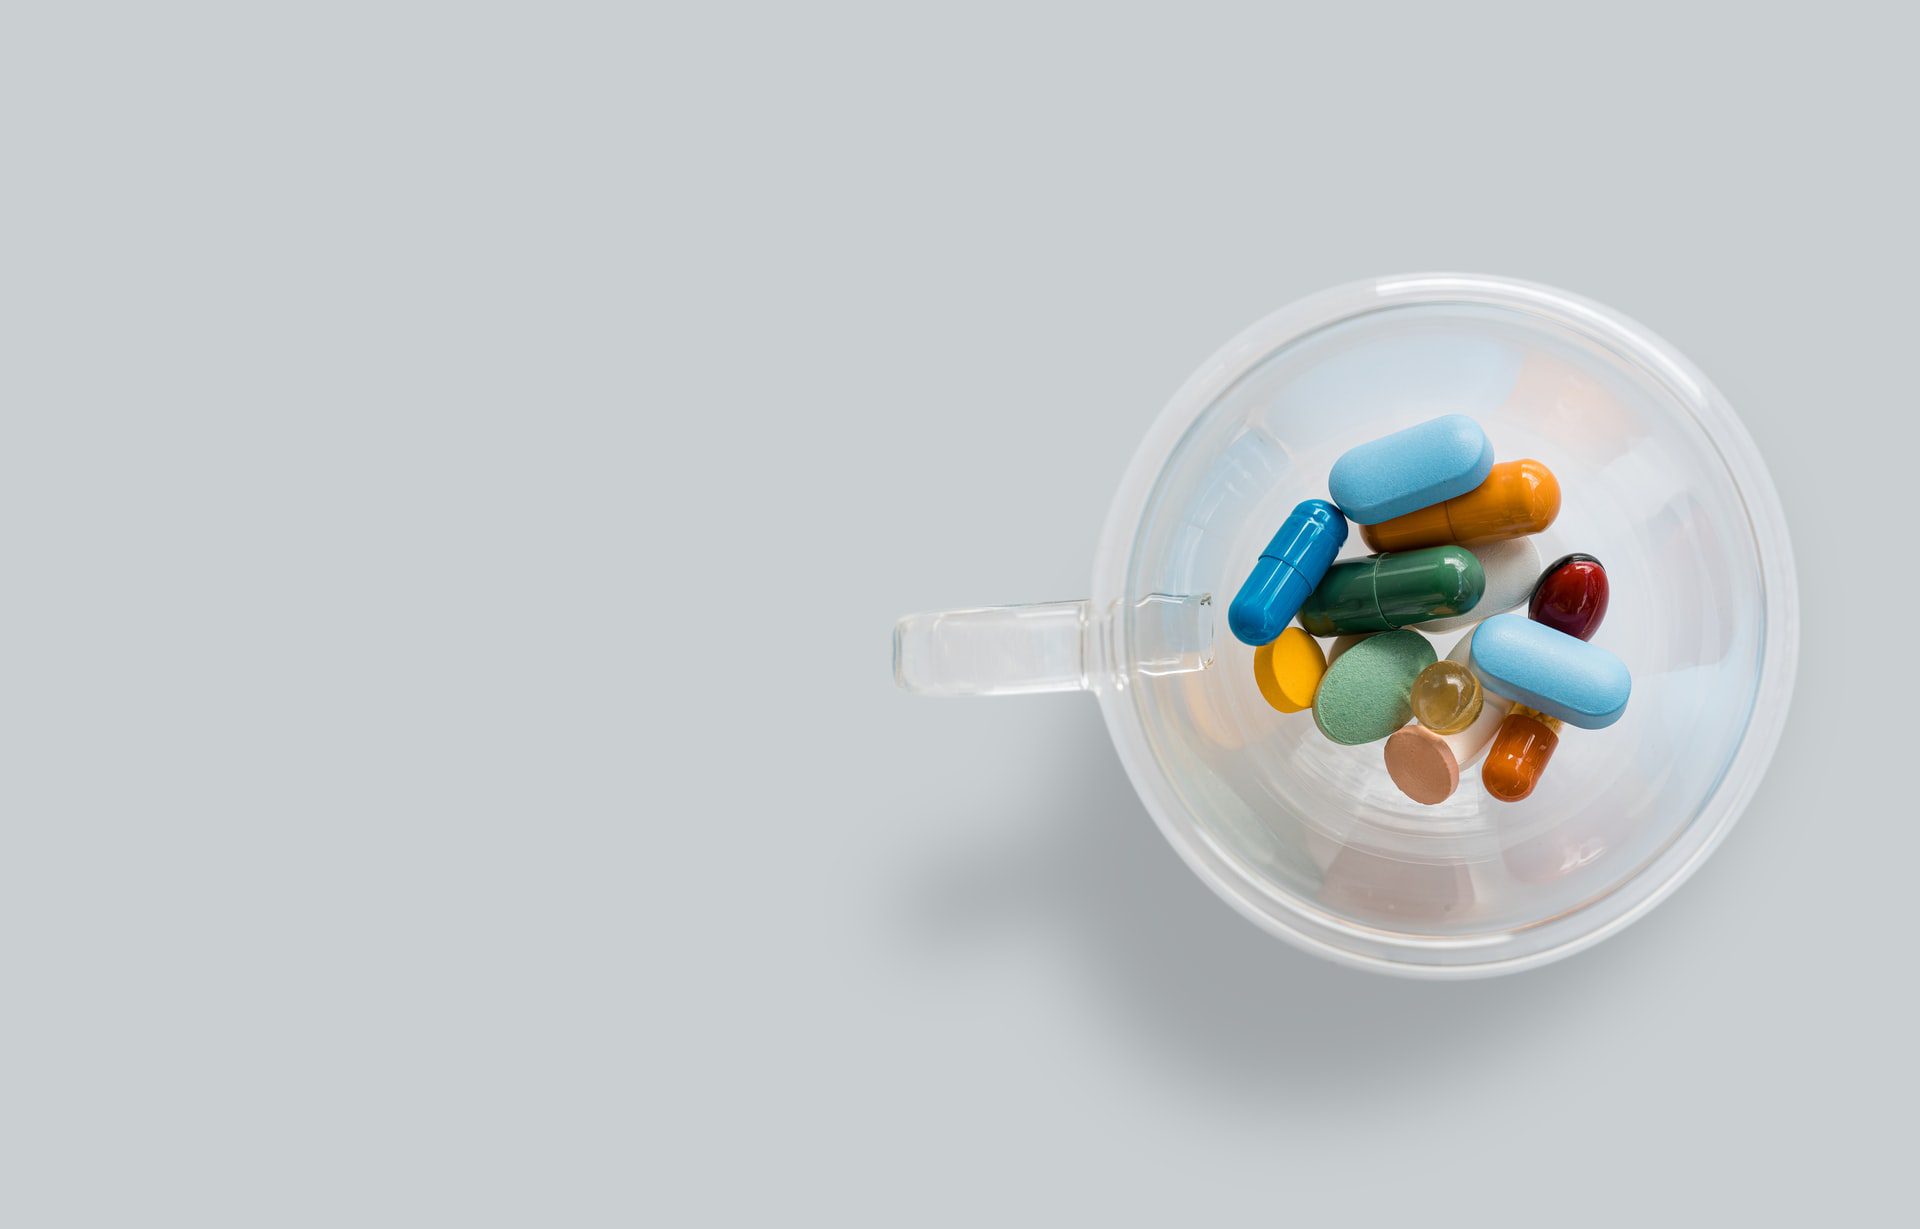 Antibiotic Use May Now Be Linked to An Increase Risk of Colorectal Cancer - PART II